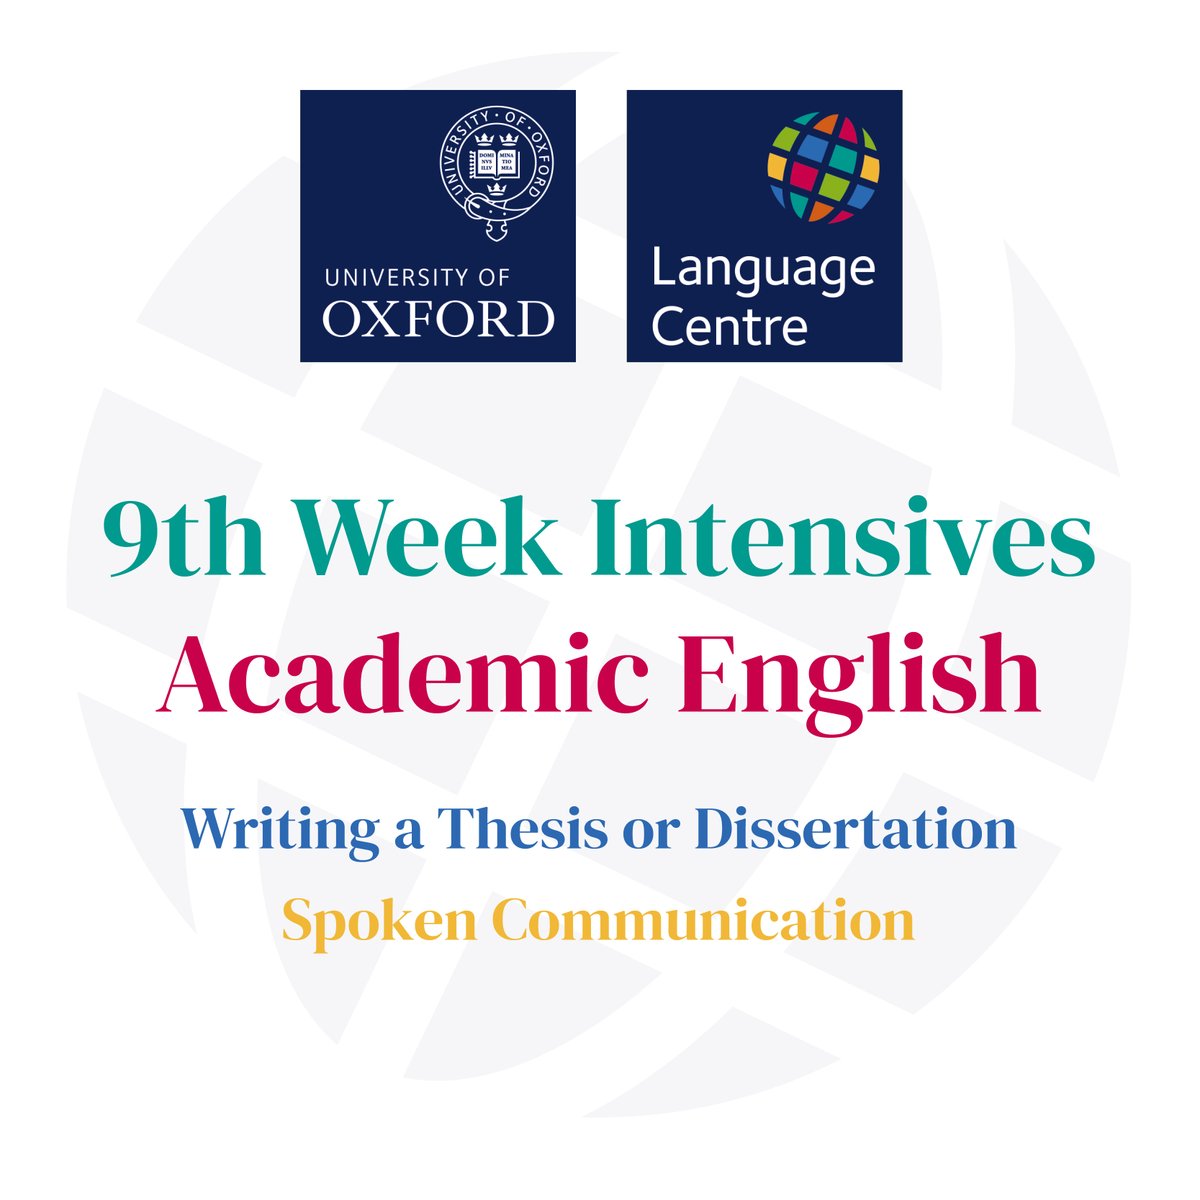 International students: Take your written & spoken communication skills to the next level with an intensive course in Academic English @OxUniLangCentre. In-person and online options allow you to choose the course that works best for you. Enrol by 15 June lang.ox.ac.uk